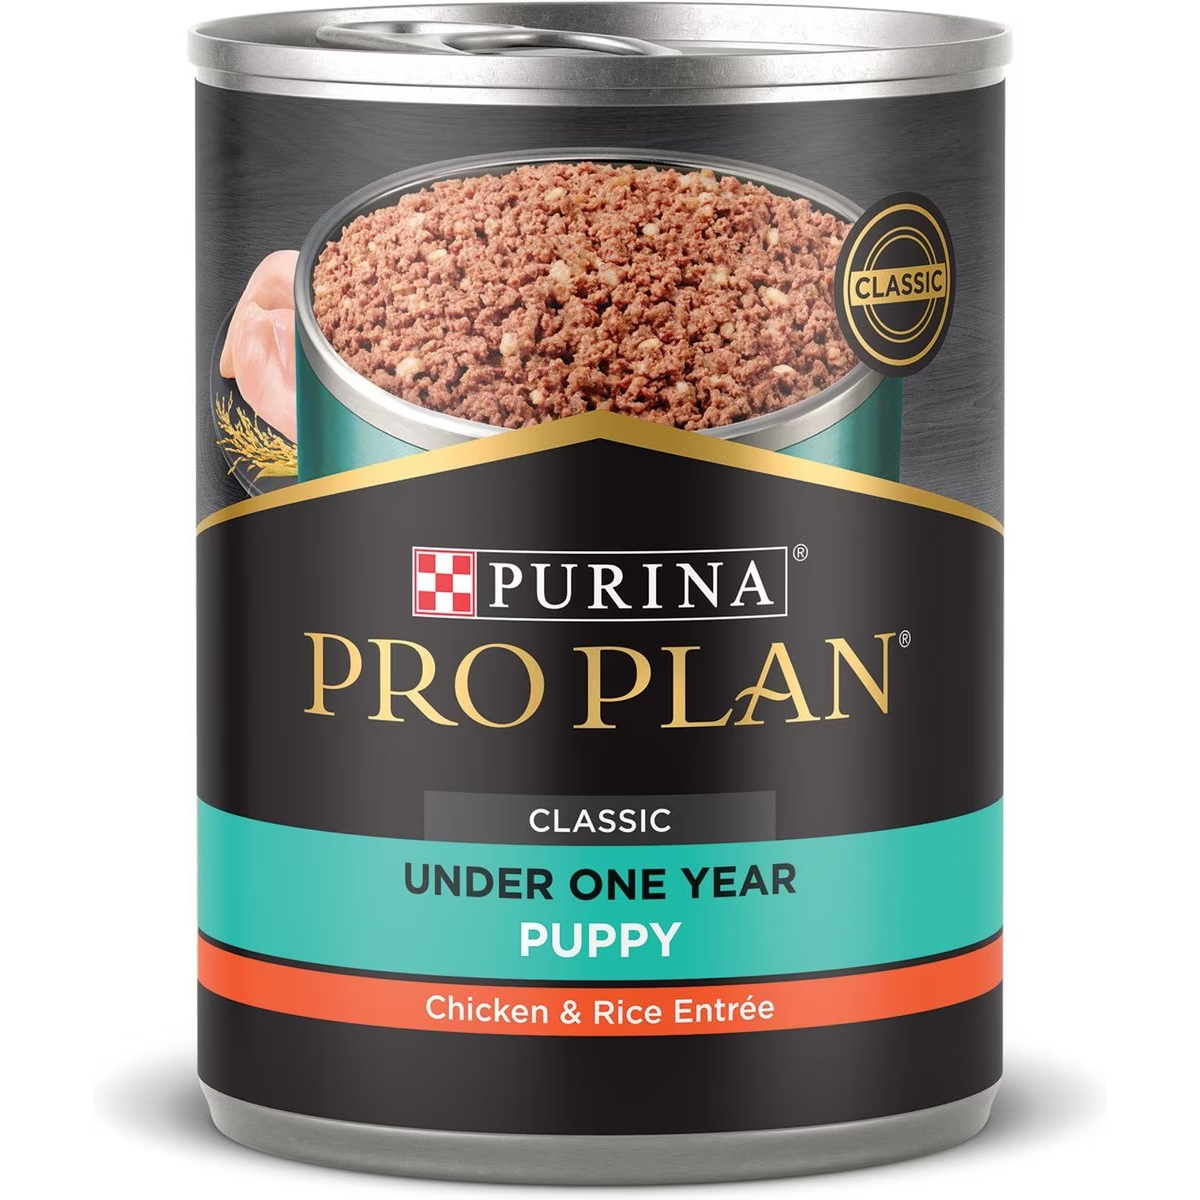 Purina Pro Plan Canned Puppy Food